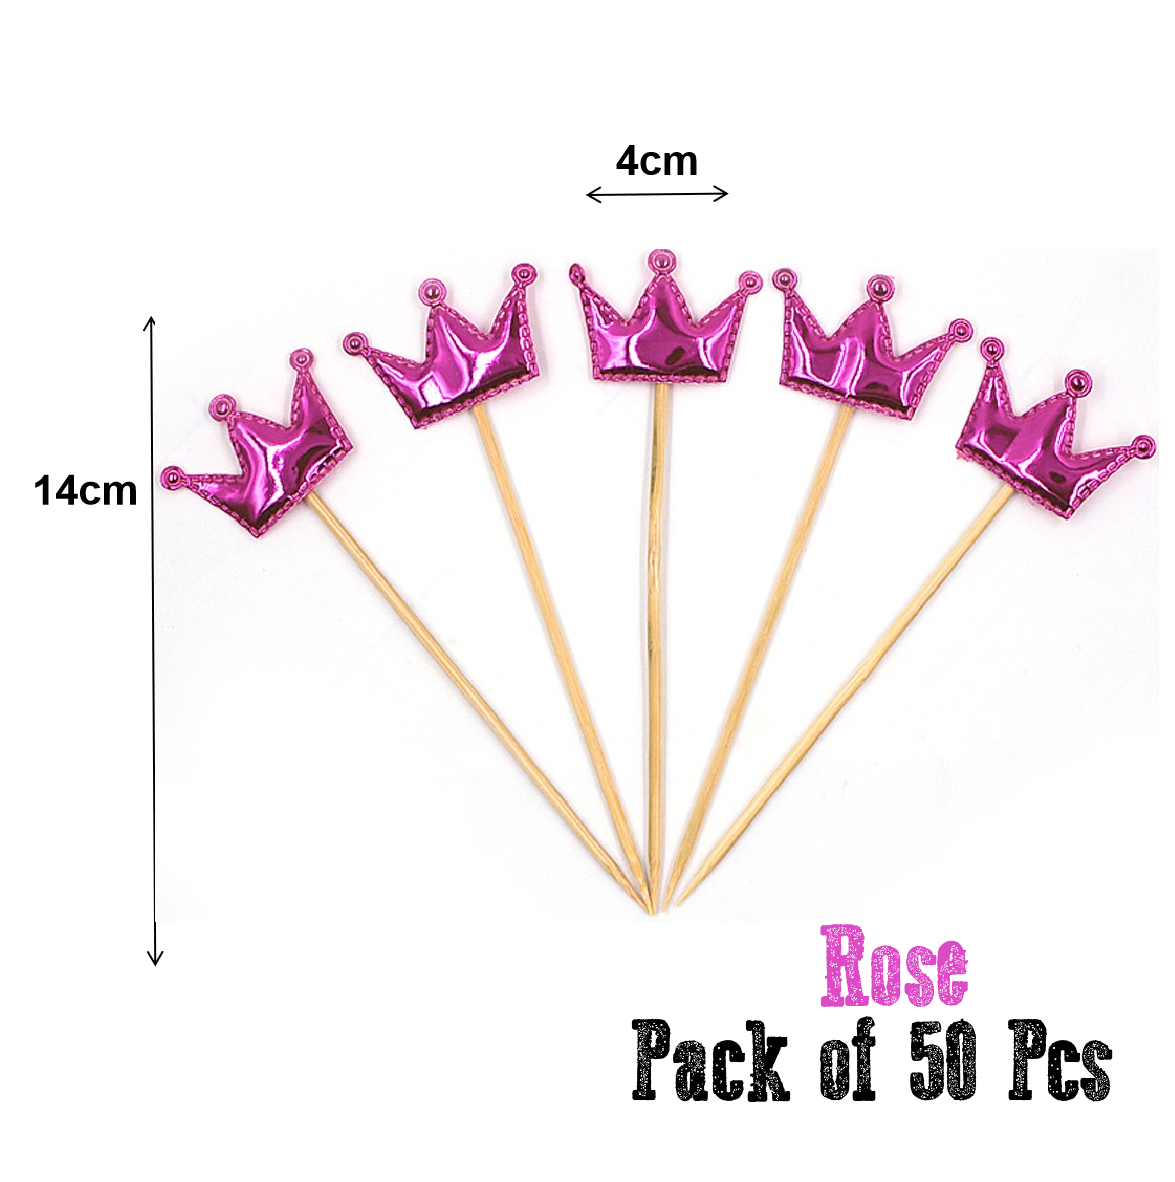 Cupcake Topper Cake Topper Decorations- Rose crowns, 50 pack - Rampant Coffee Company